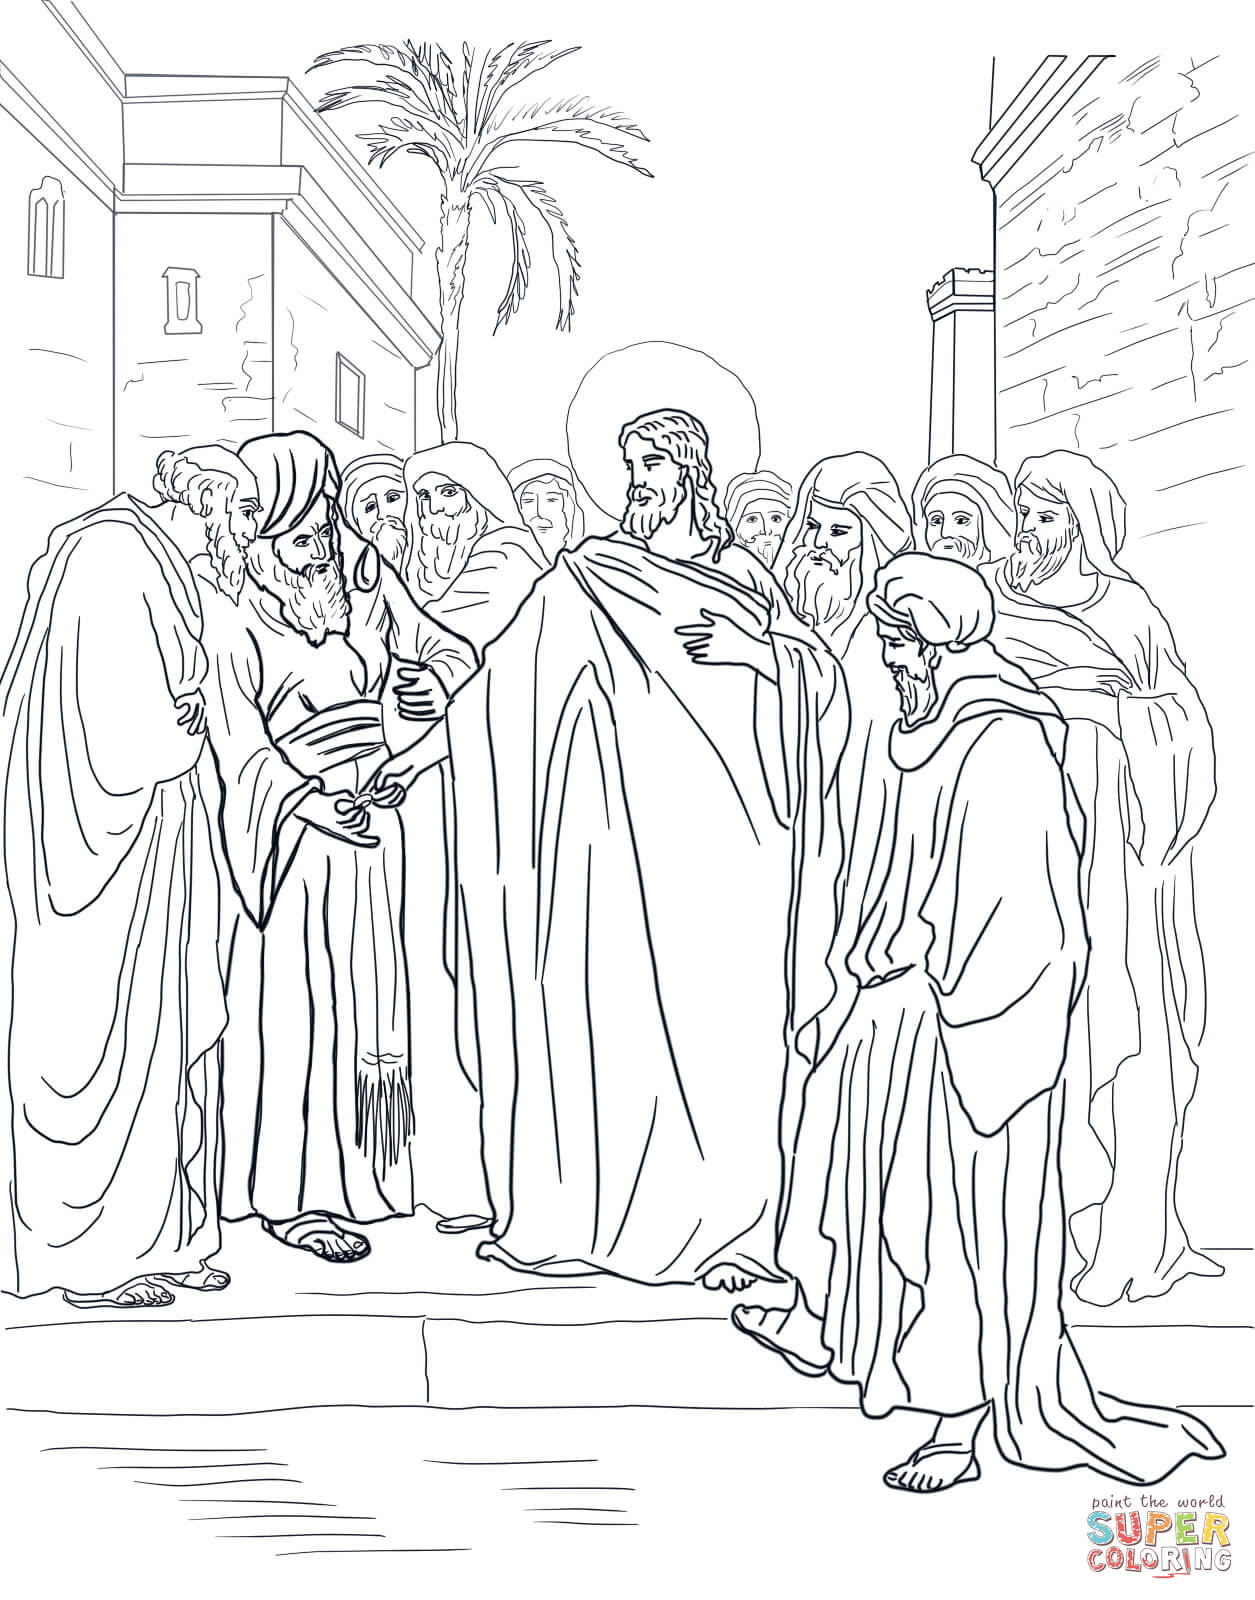 Pharisees question jesus about taxes coloring page free printable coloring pages